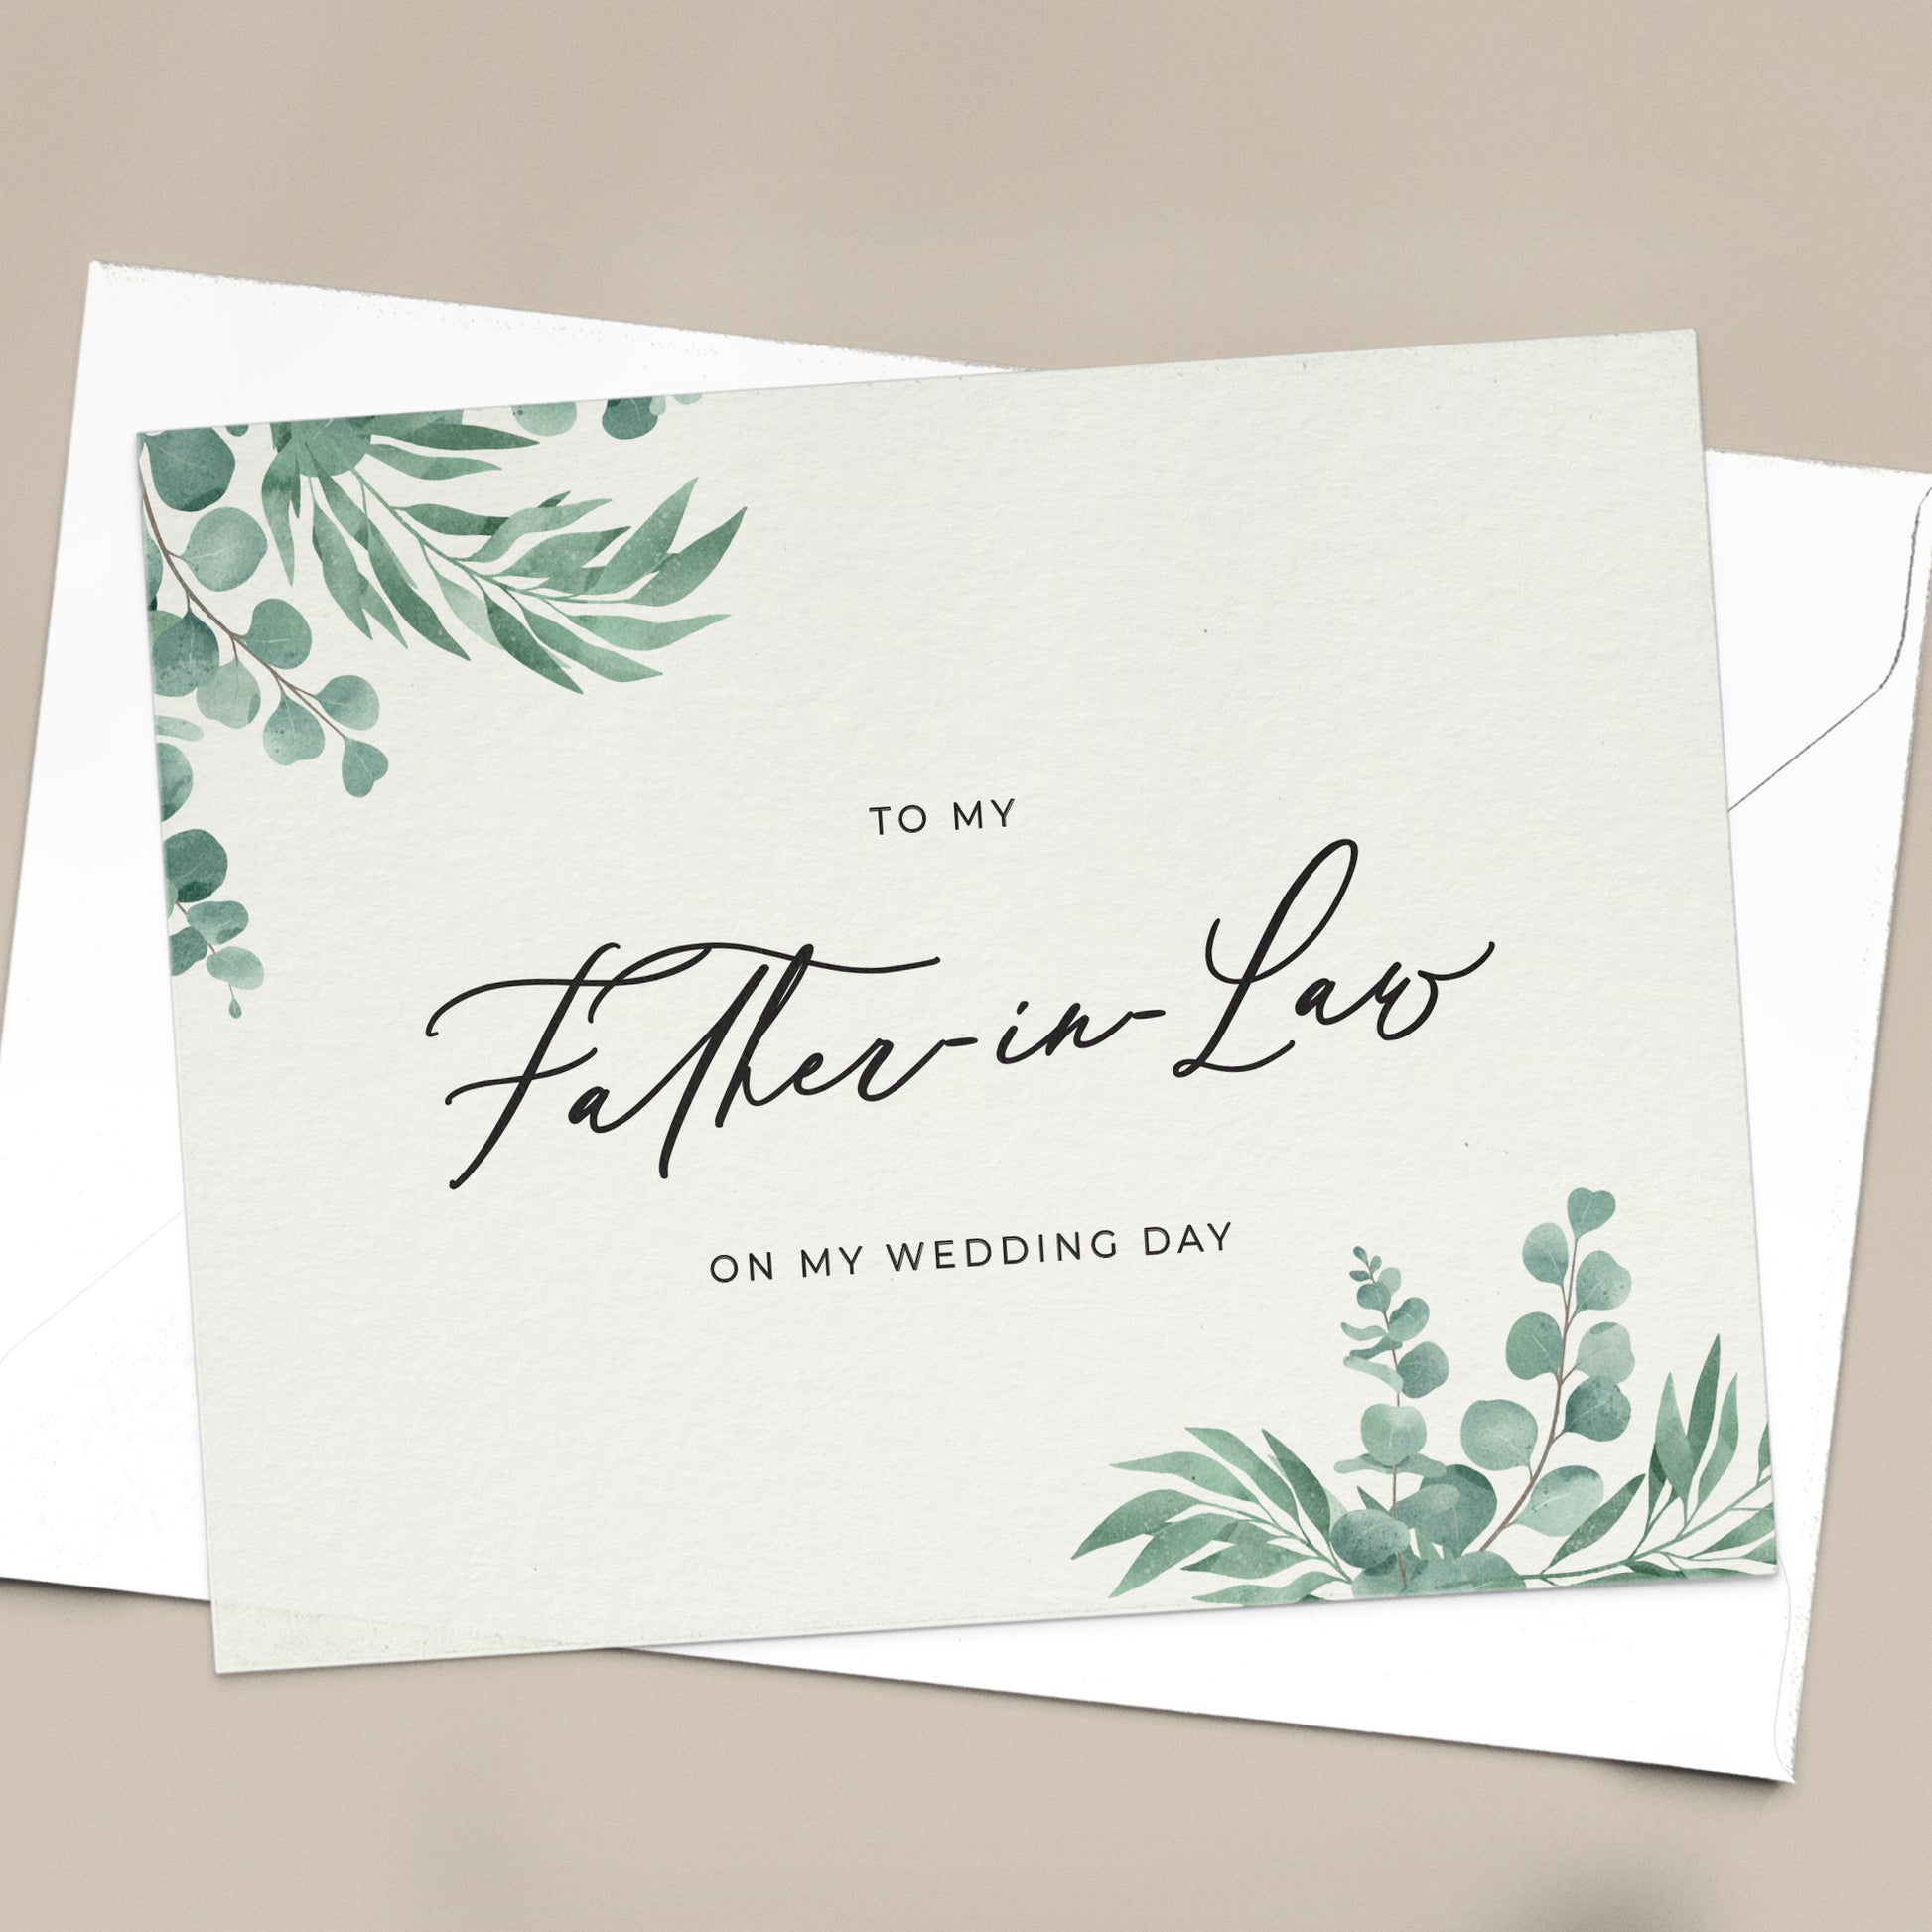 To my father-in-law on my wedding day note card in greenery design with eucalyptus leaves and calligraphy font from XOXOKristen.